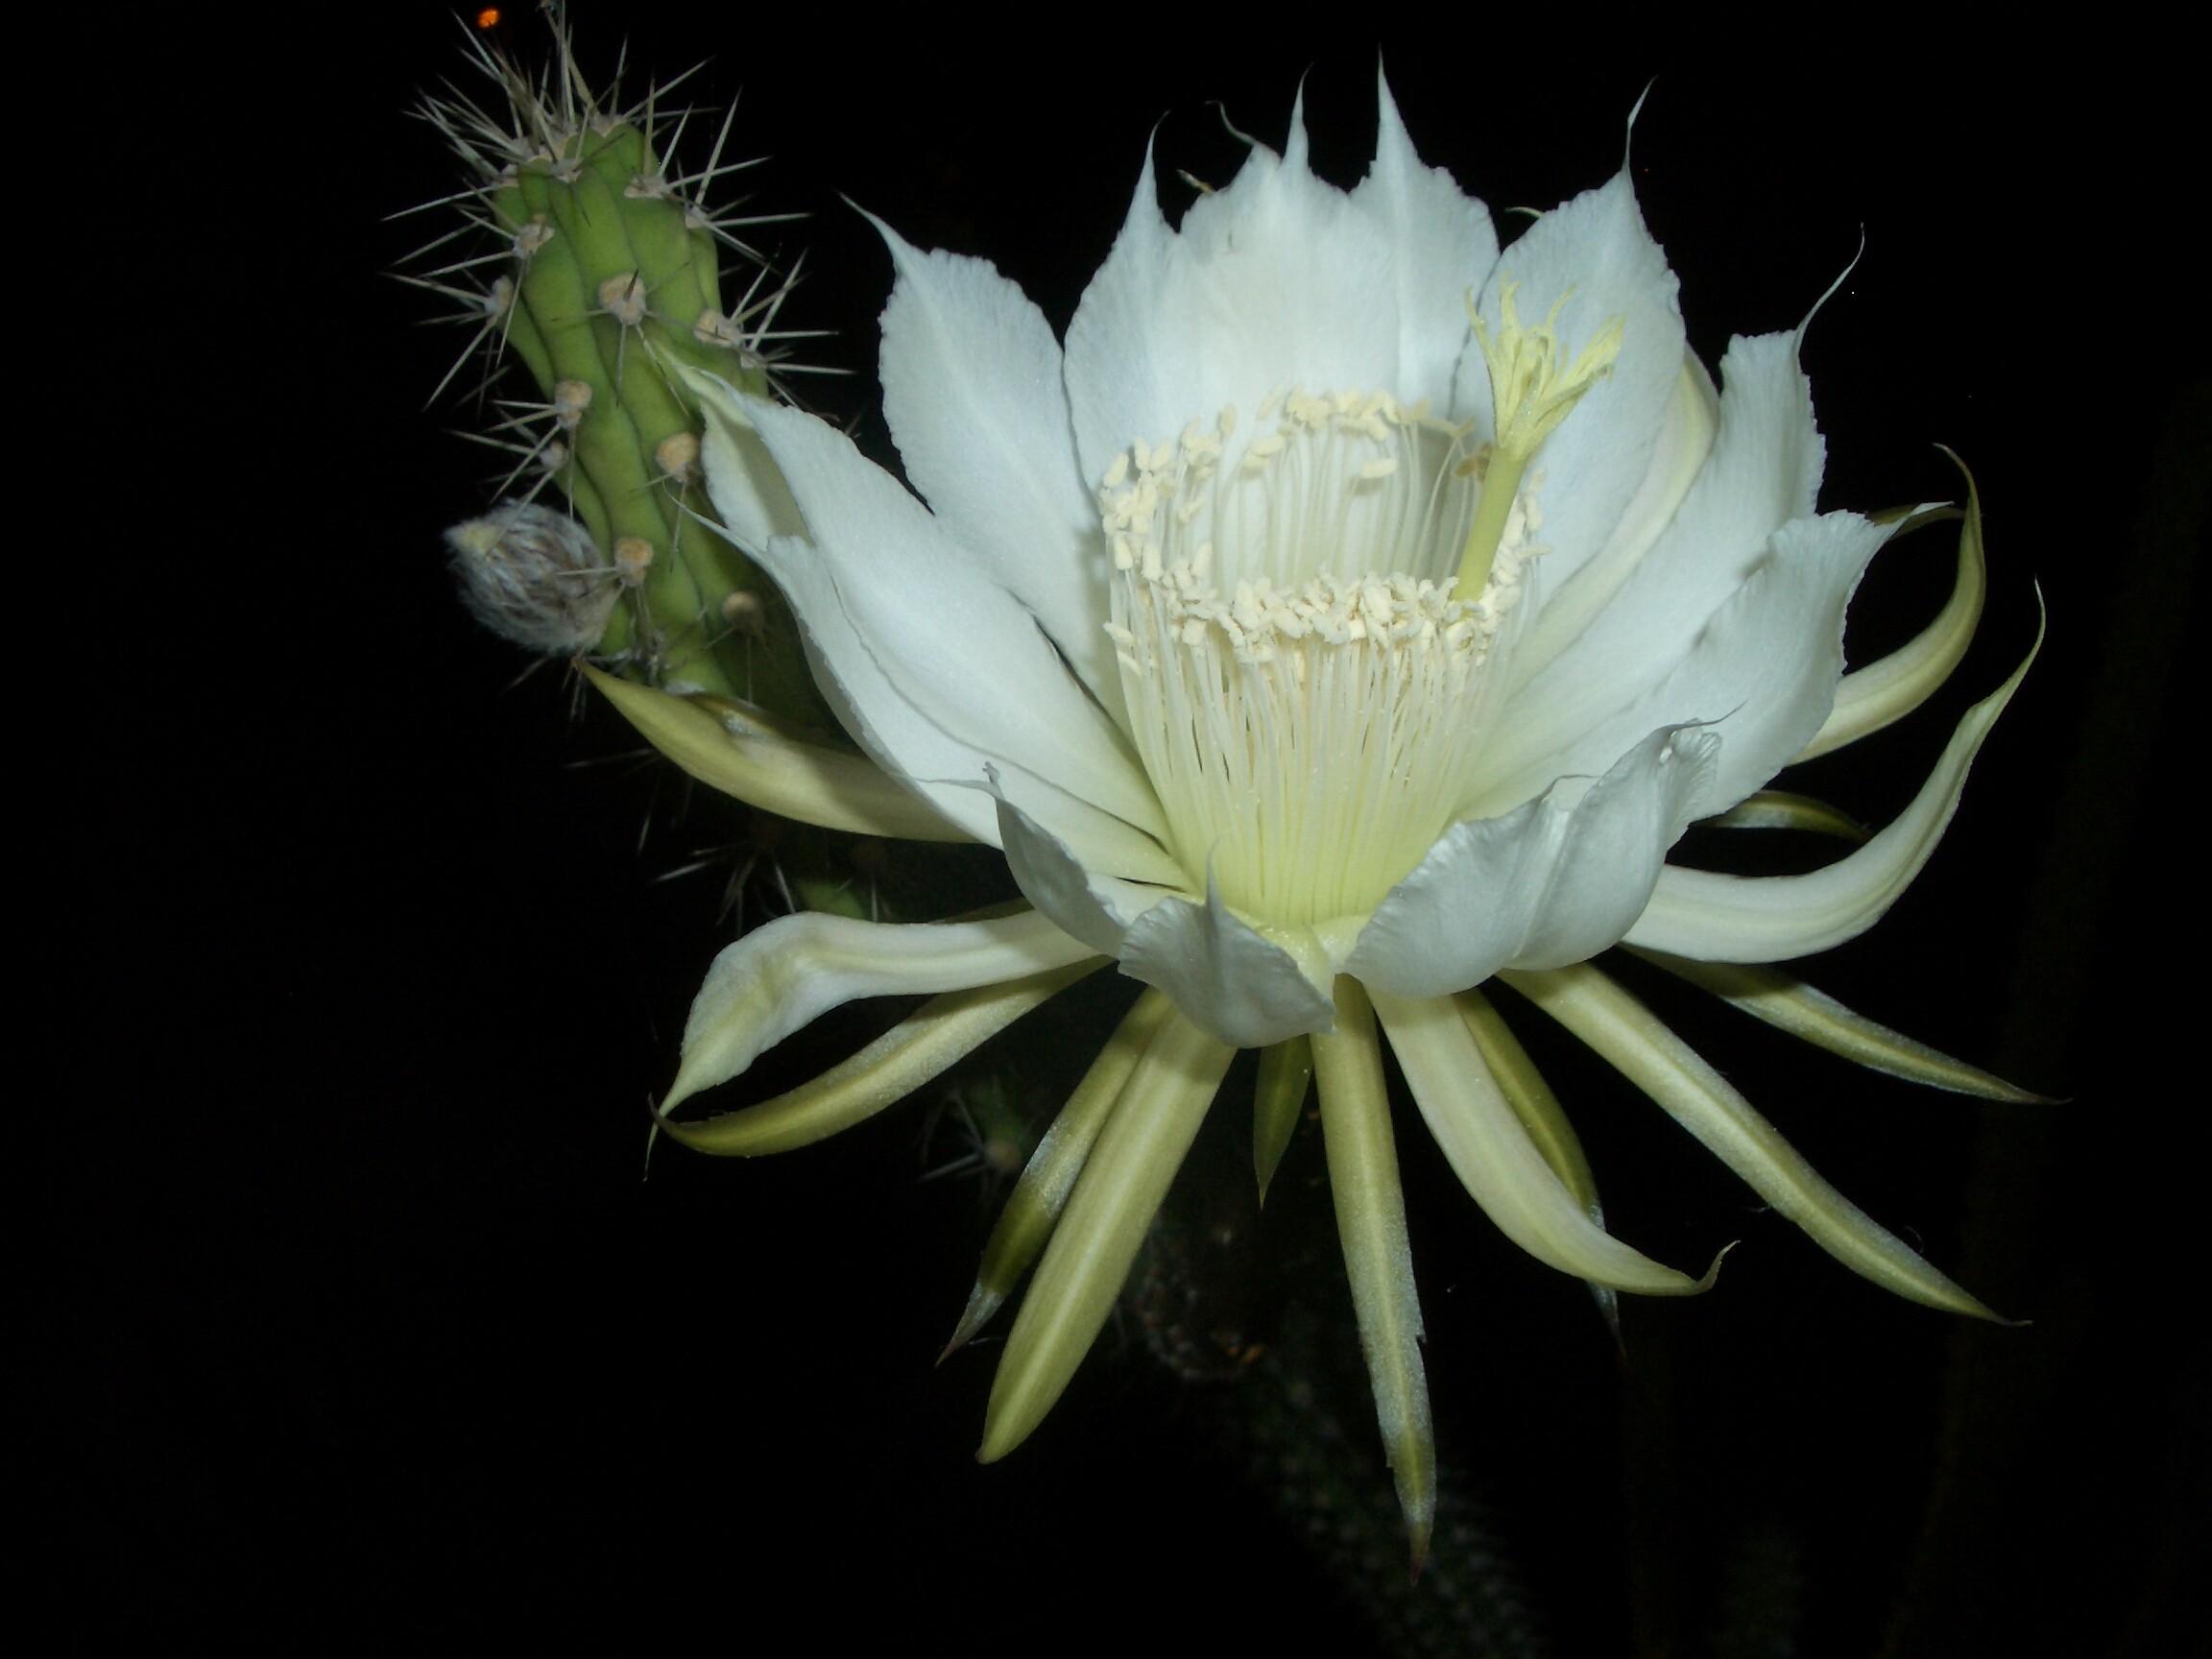 Selby Gardens Wins Prestigious Grant to Protect Endangered Cactus Species